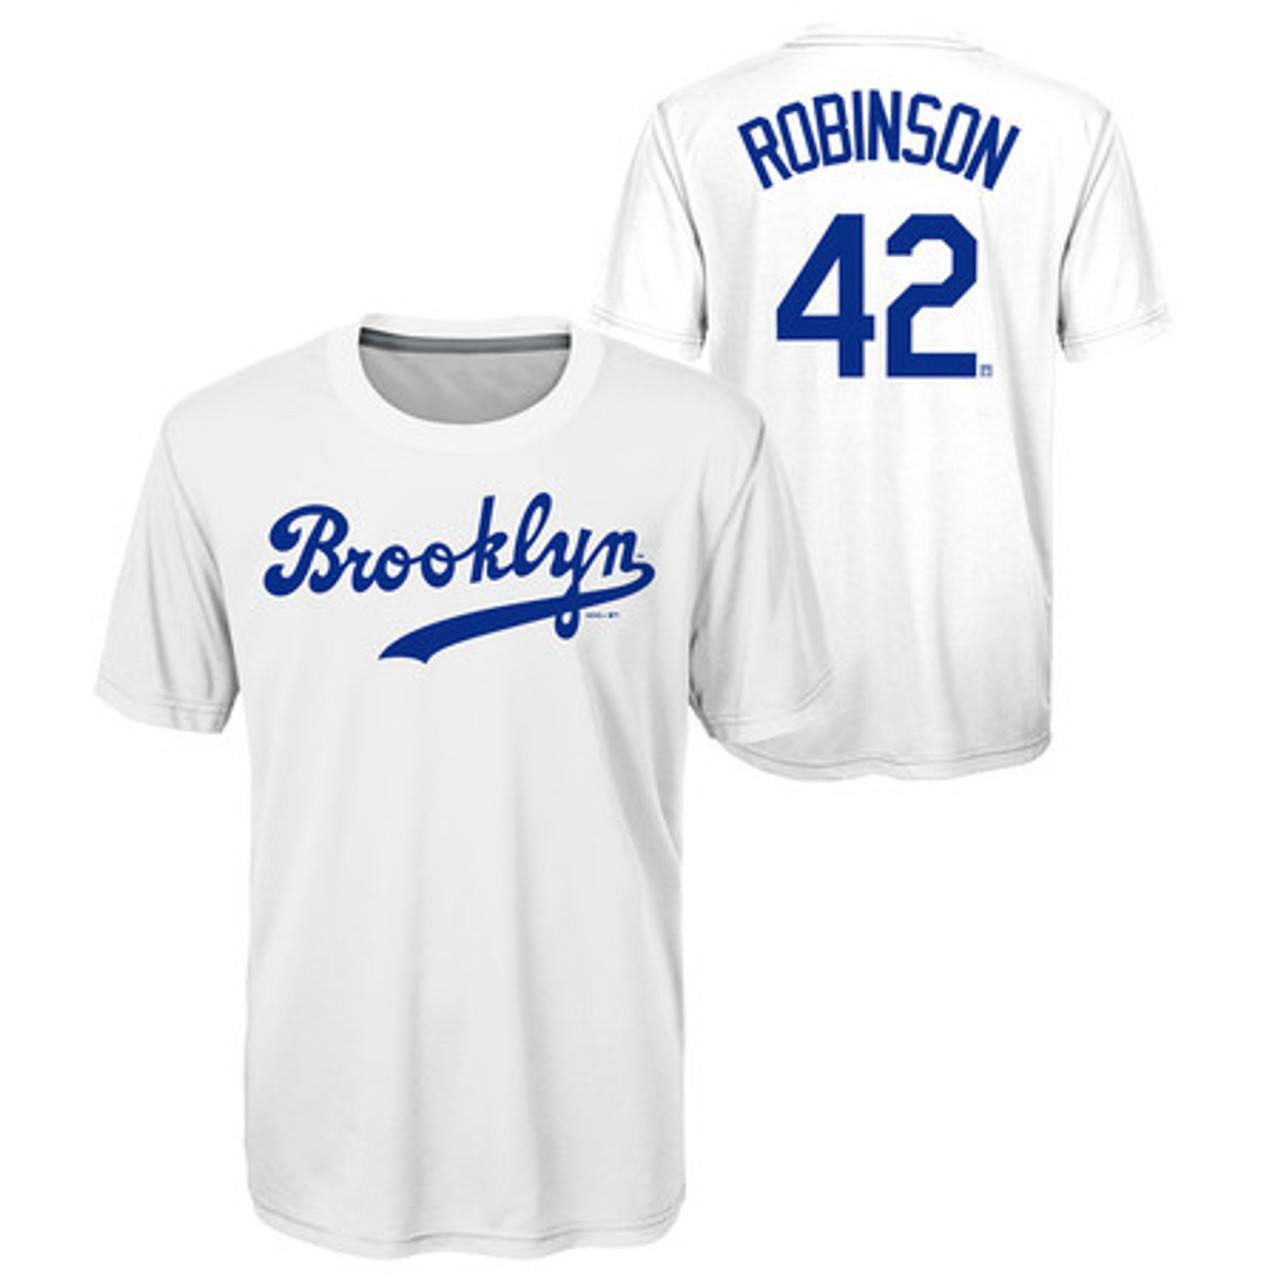 dodgers jersey youth near me